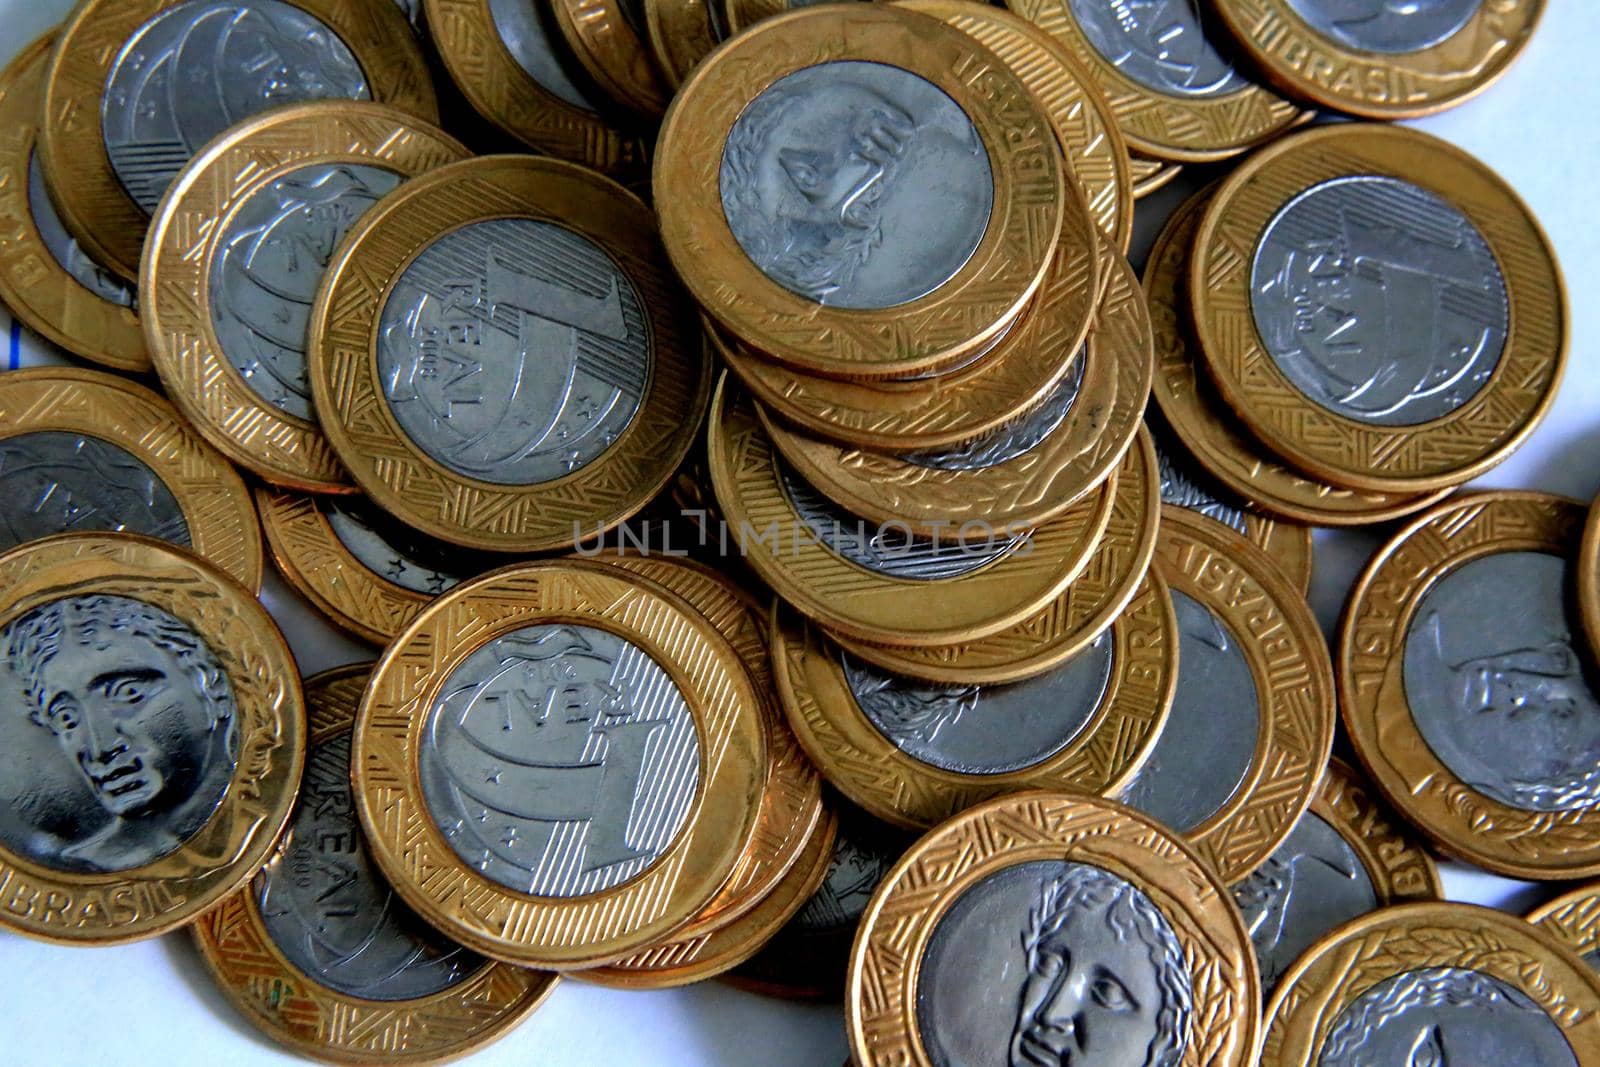 salvador, bahia / brazil - january 23, 2015: Heaped real coins forming collection in the city of Salvador.

